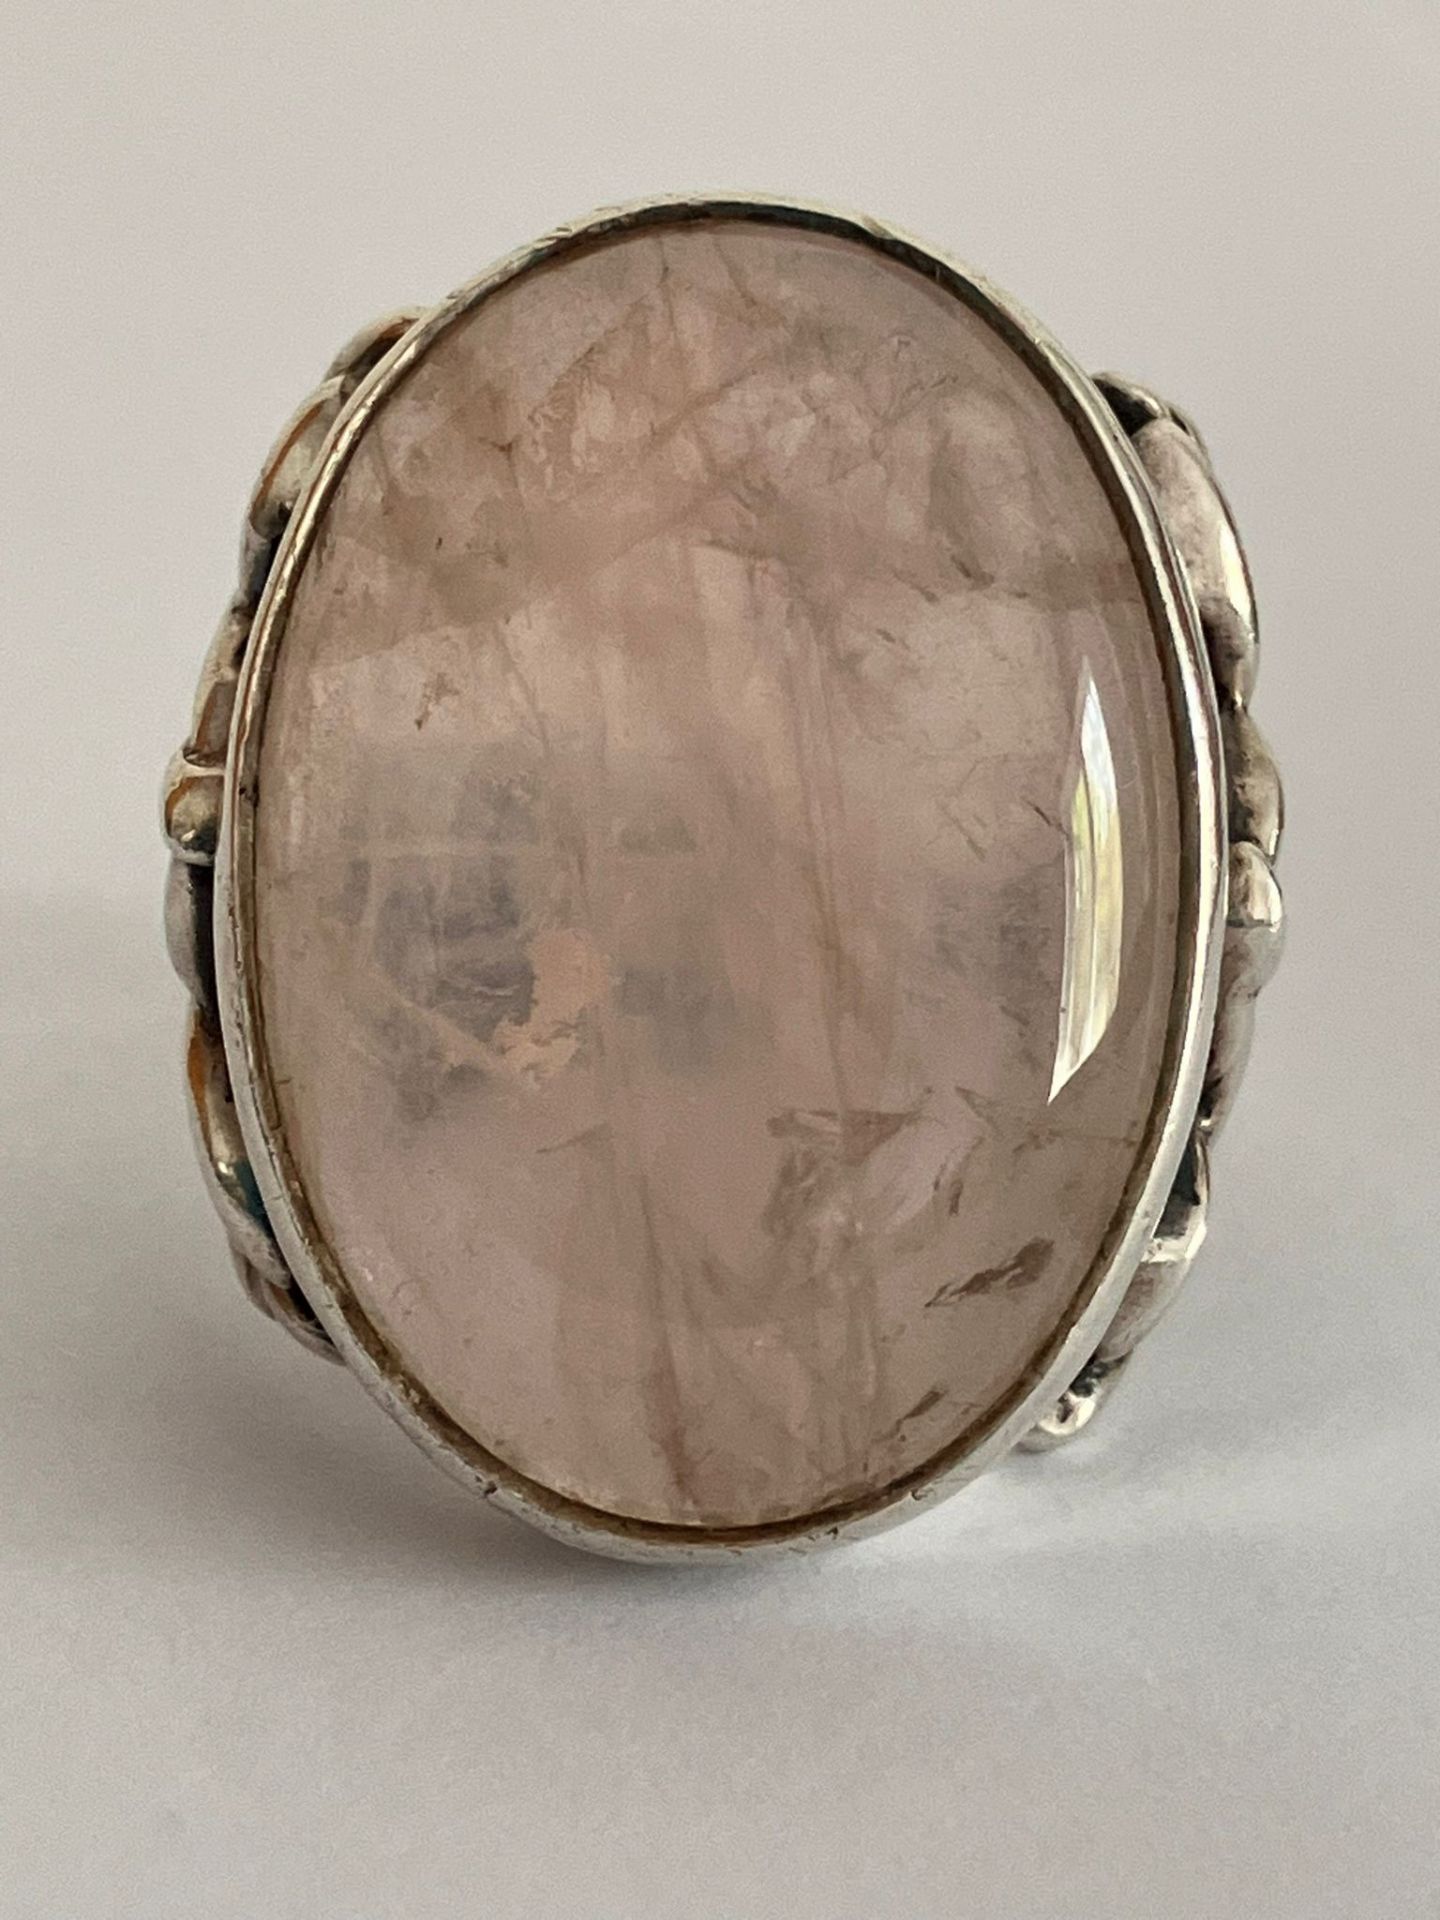 Vintage SILVER MOONSTONE RING, having a large cloudy moonstone with a hint of pale pink mist.